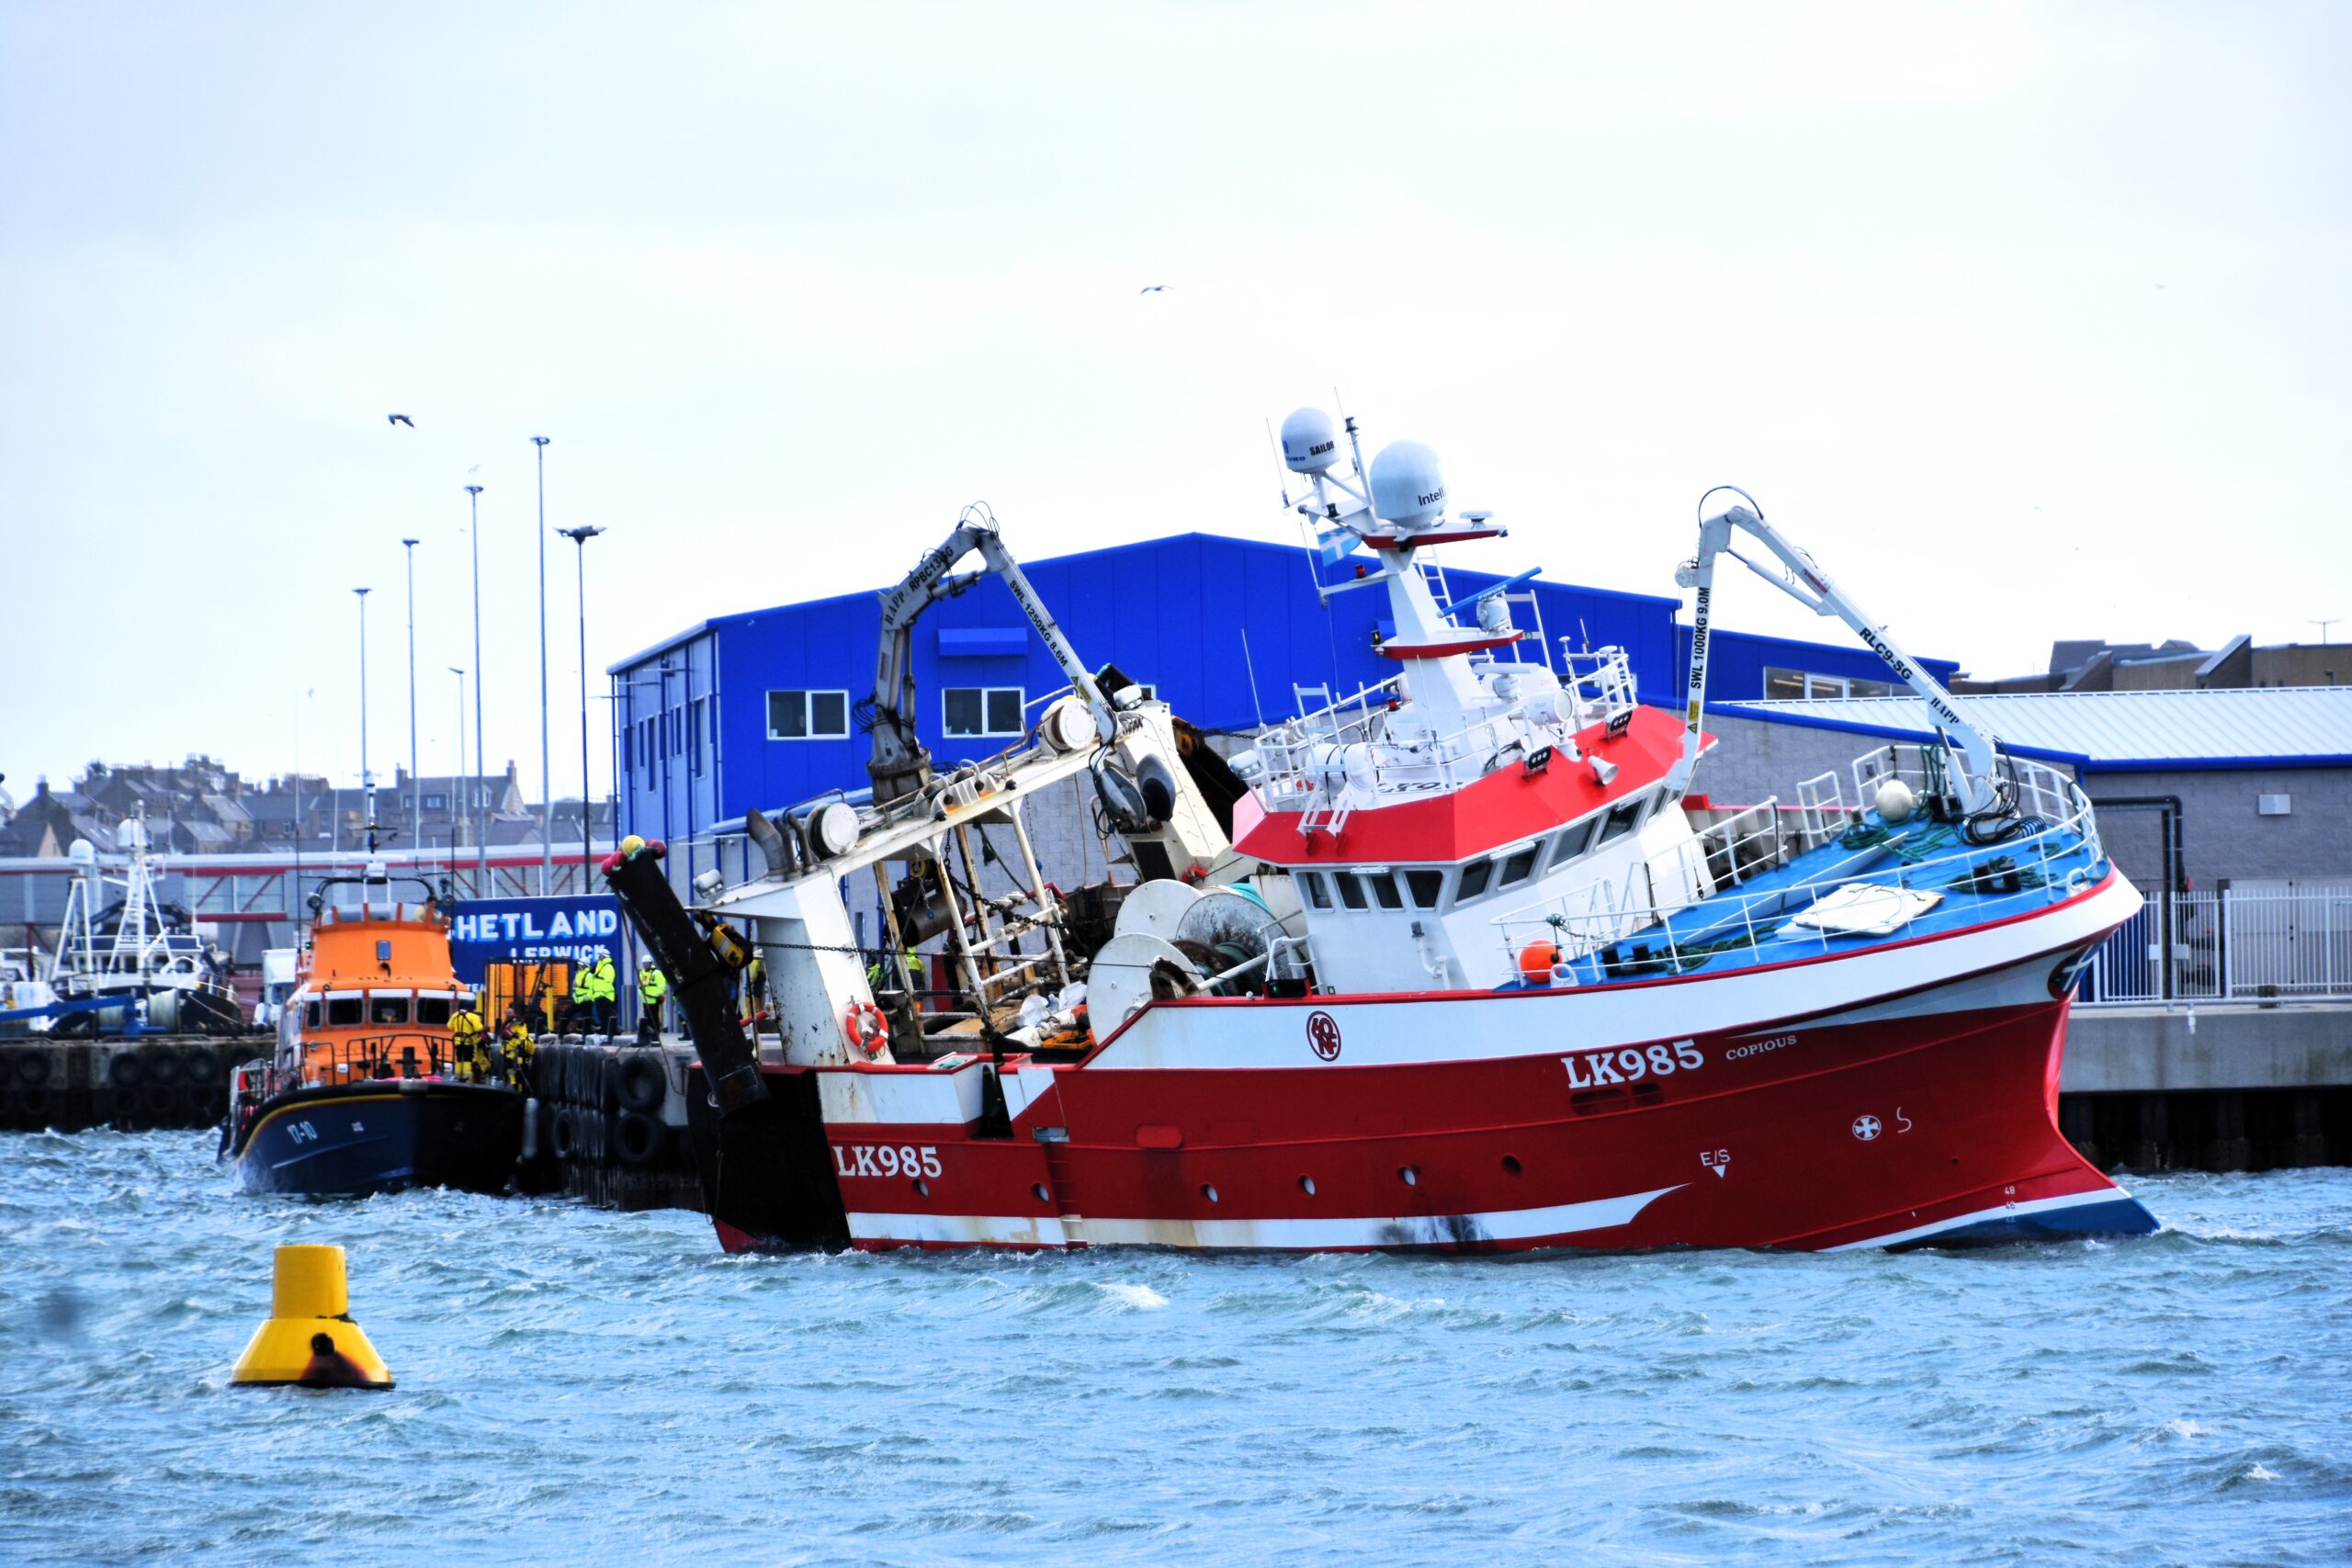 UPDATE: Copious refloated after distress call | The Shetland Times Ltd